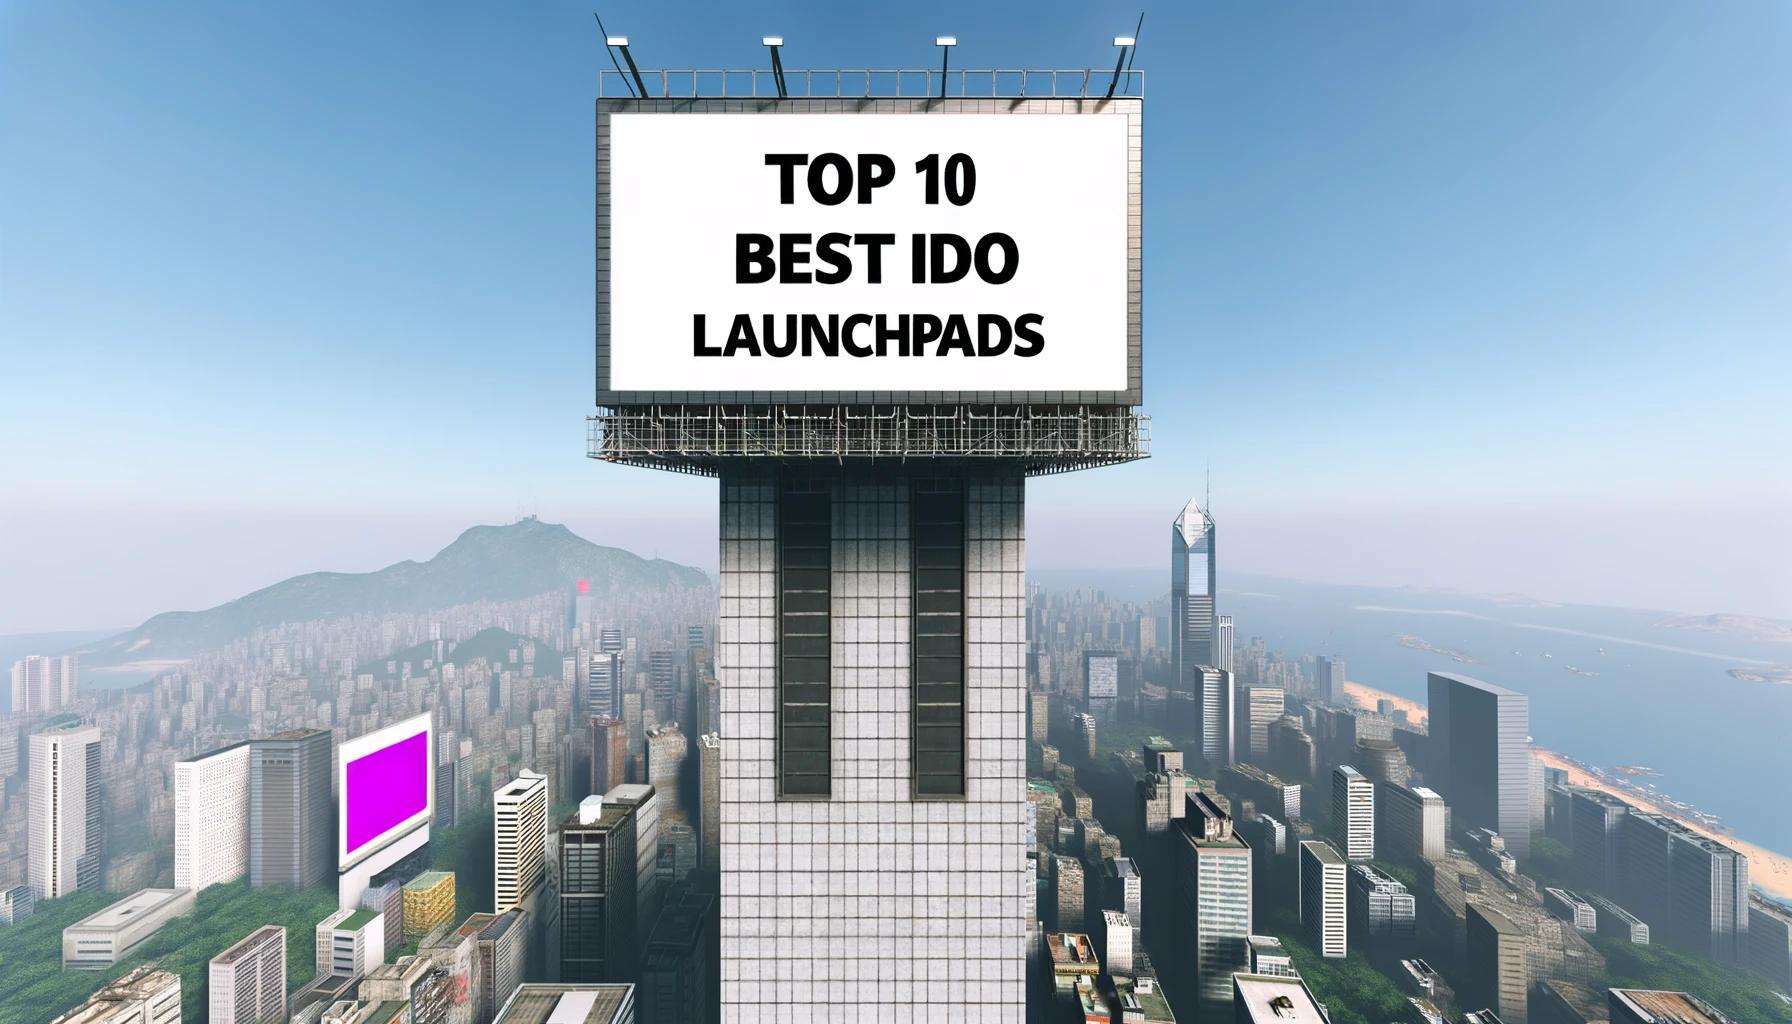 Cover Image for Top 10 Best IDO Launchpads in Crypto Ranked